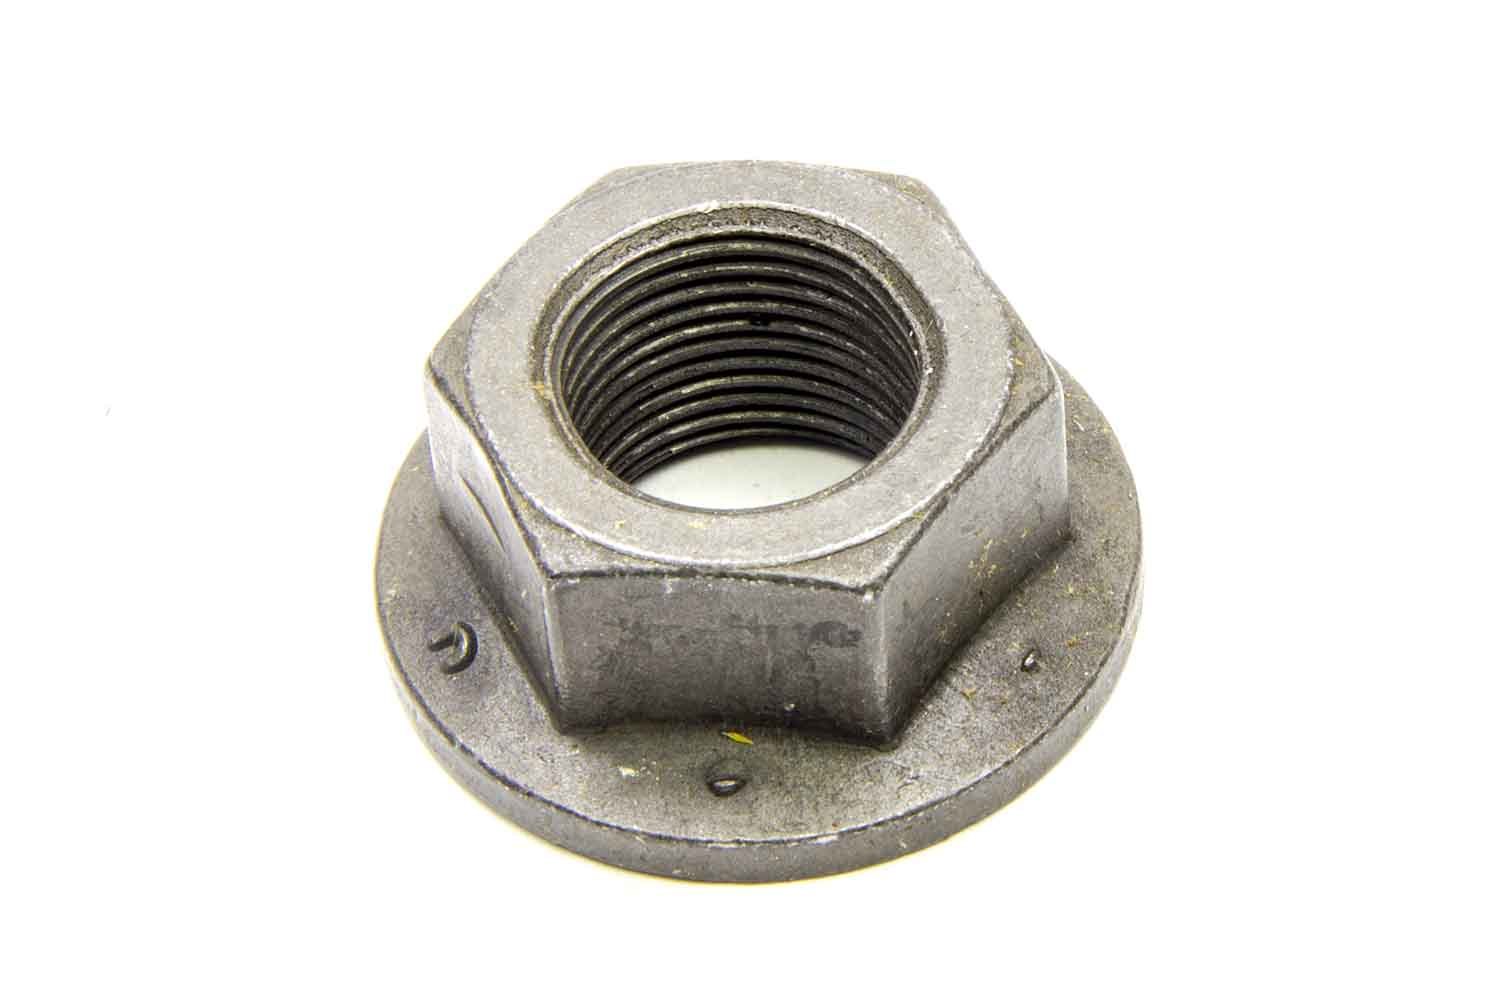 Ratech 1509 Pinion Nut, 1-14 in Thread, Steel, Natural, Large Bearing Pinion Support, Ford 9 in, Each